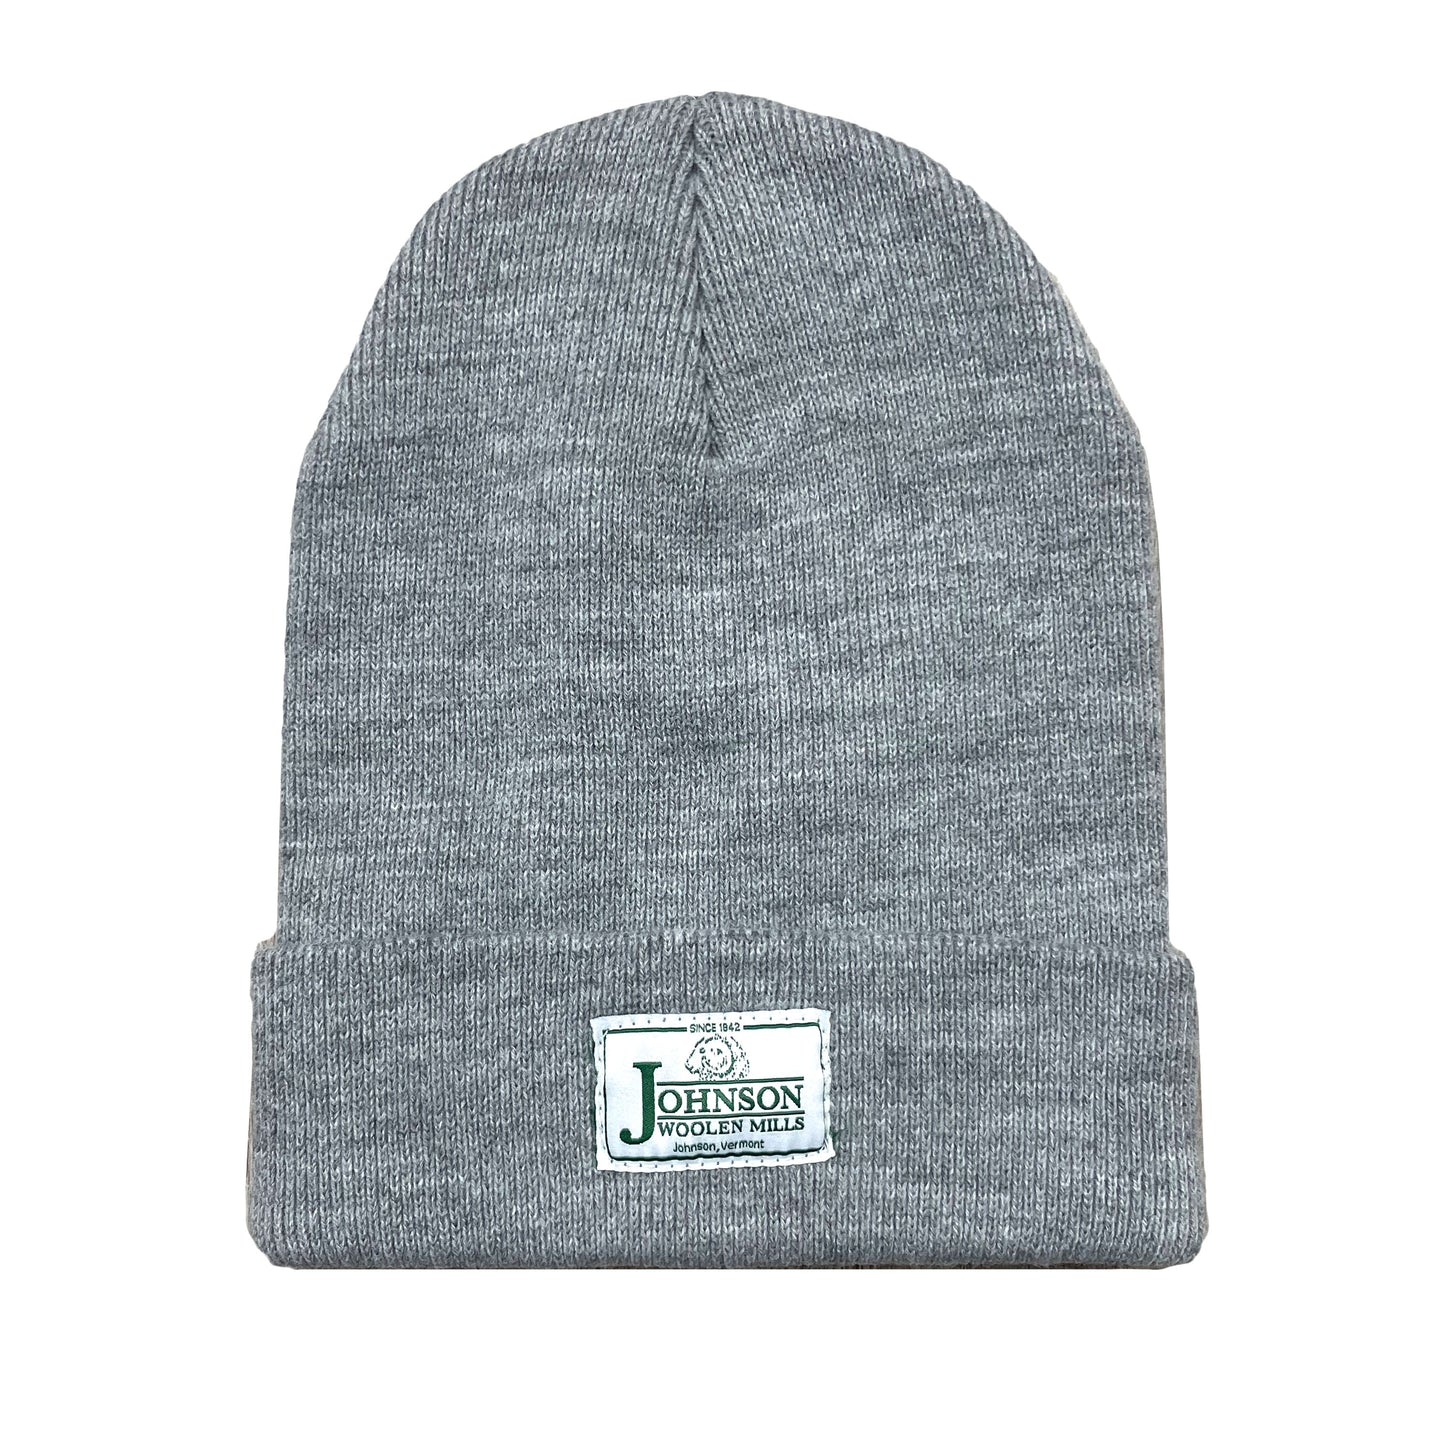 Gray beanie with white label